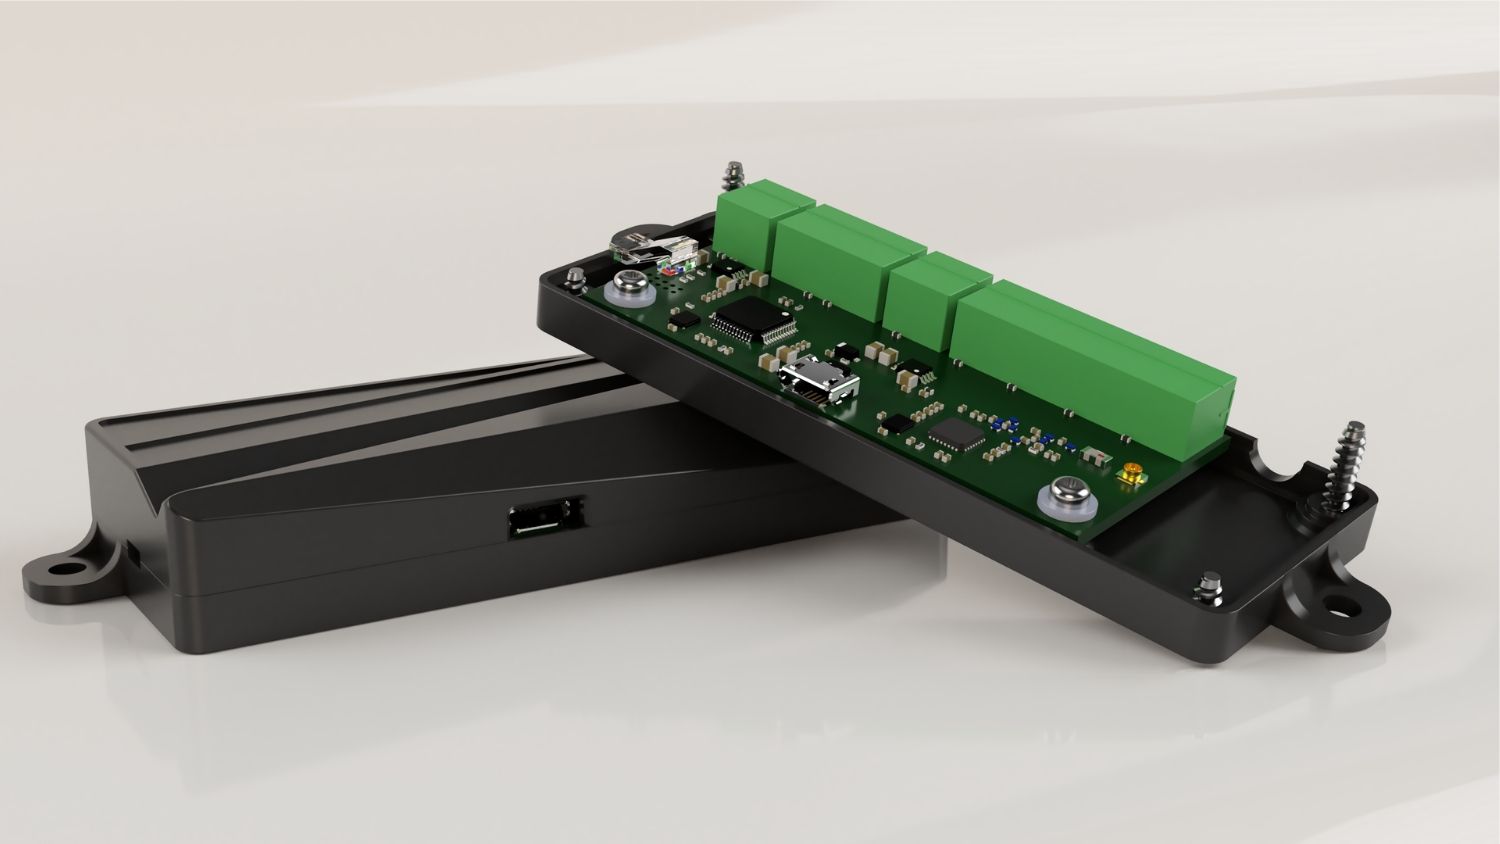 3D render of the finished board within its newly designed enclosure